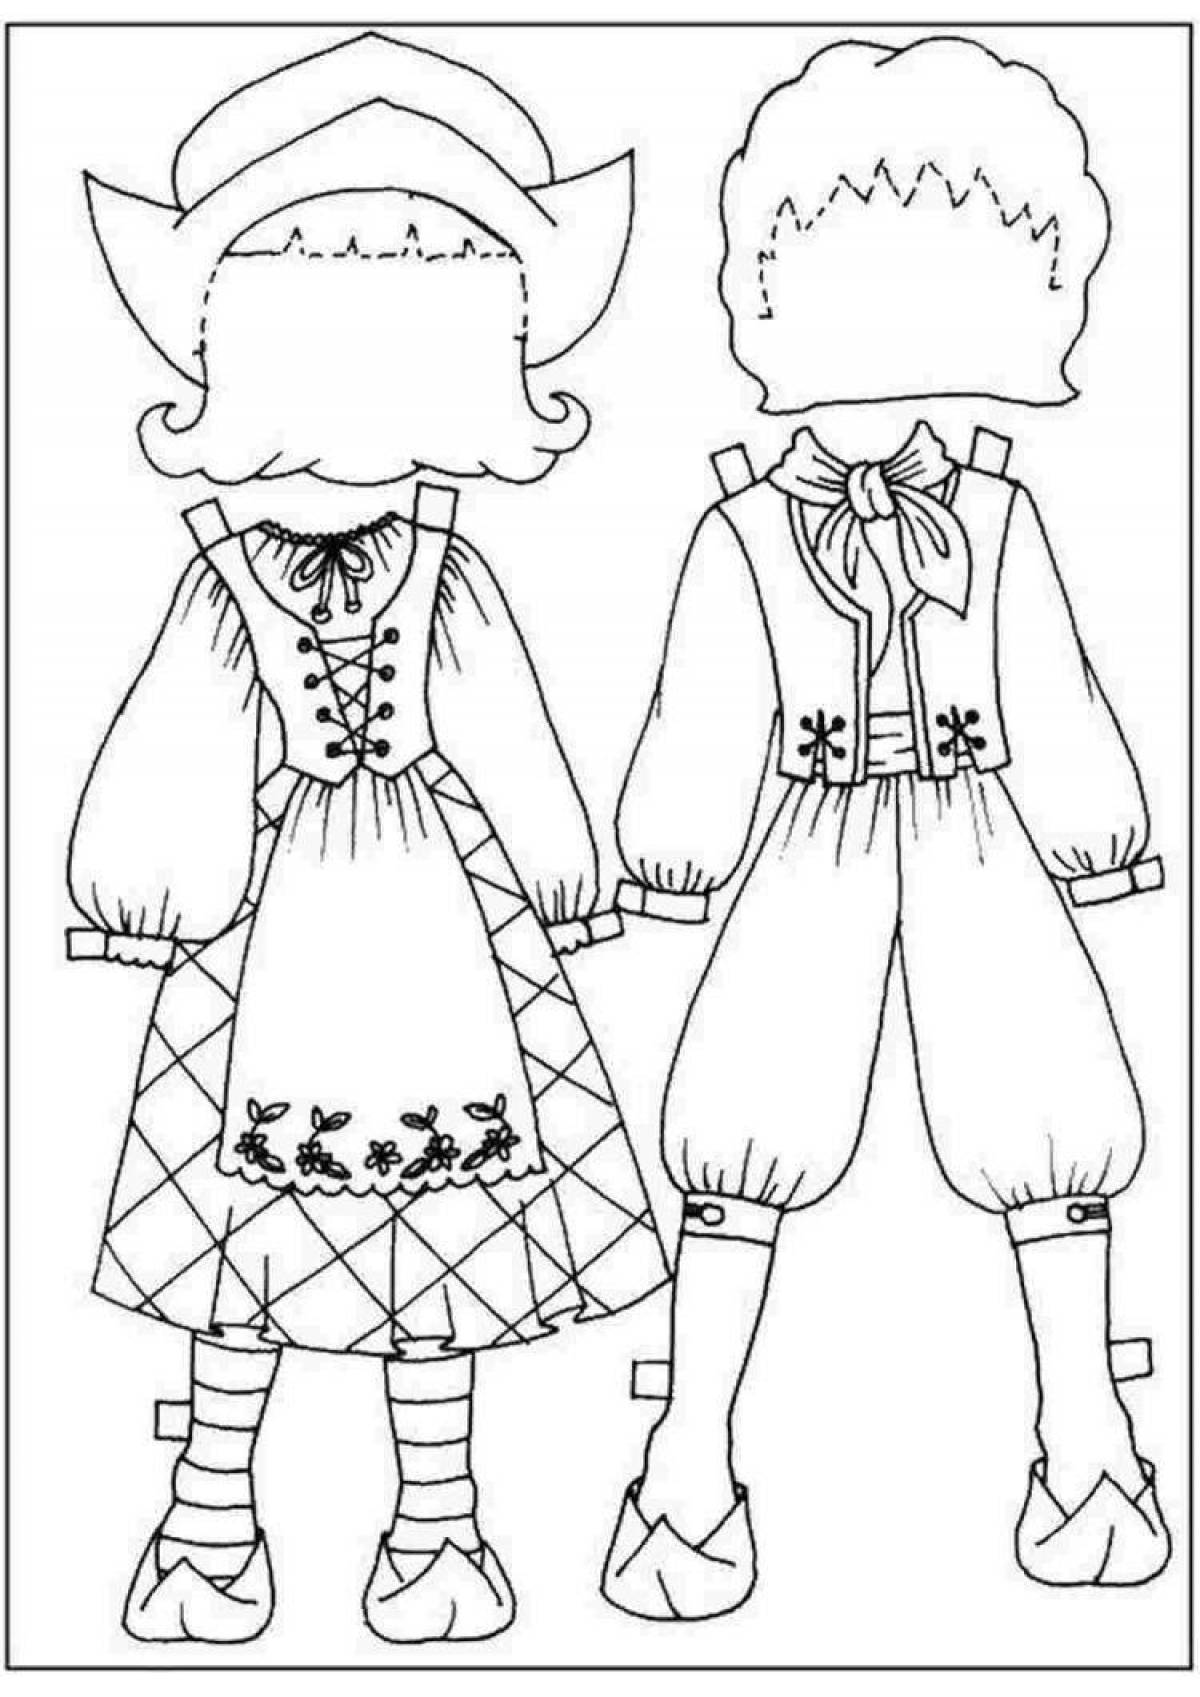 Coloring page violent belarusian doll